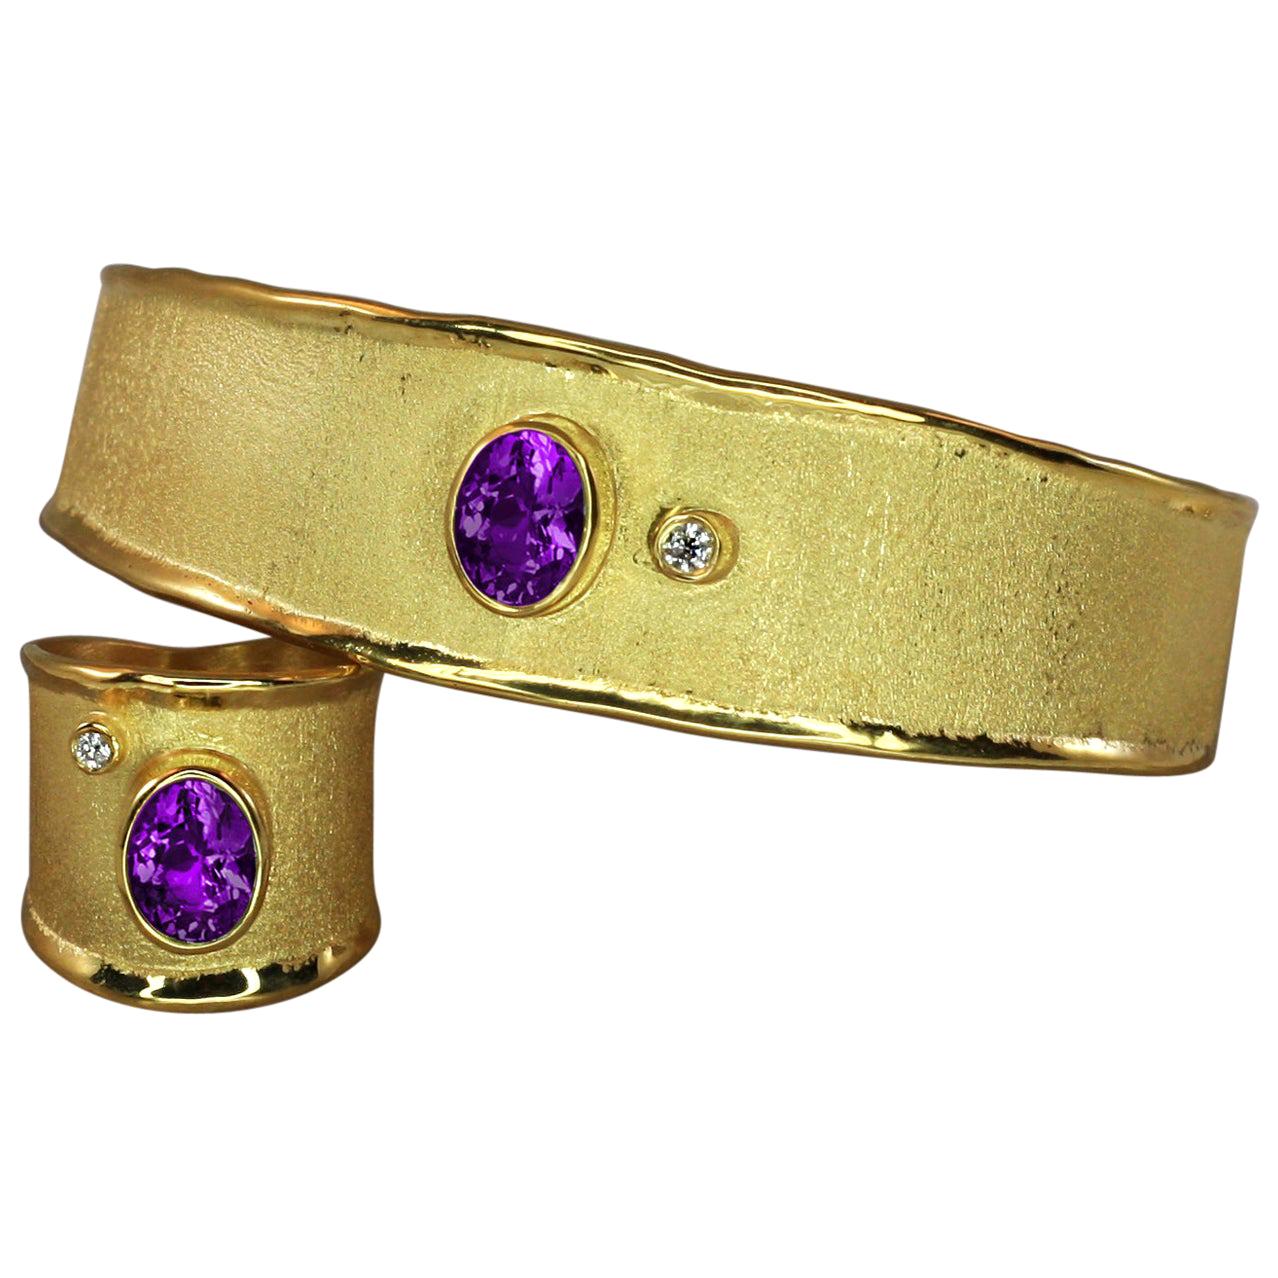 Yianni Creations 18 Karat Solid Gold Diamond Bracelet and Ring Set with Amethyst